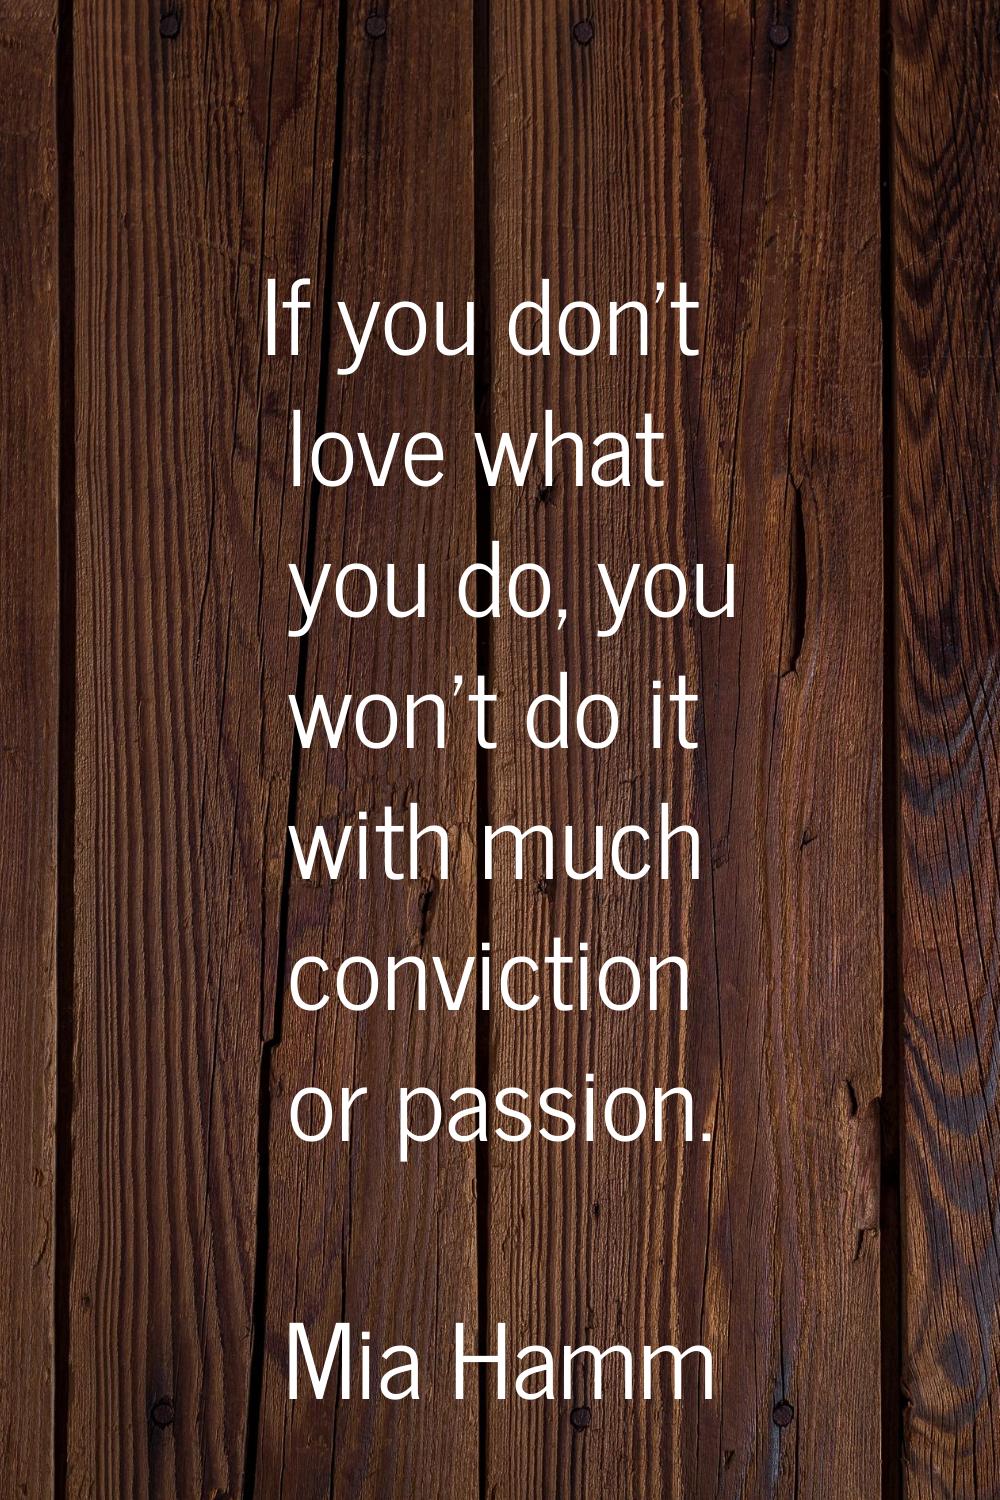 If you don't love what you do, you won't do it with much conviction or passion.